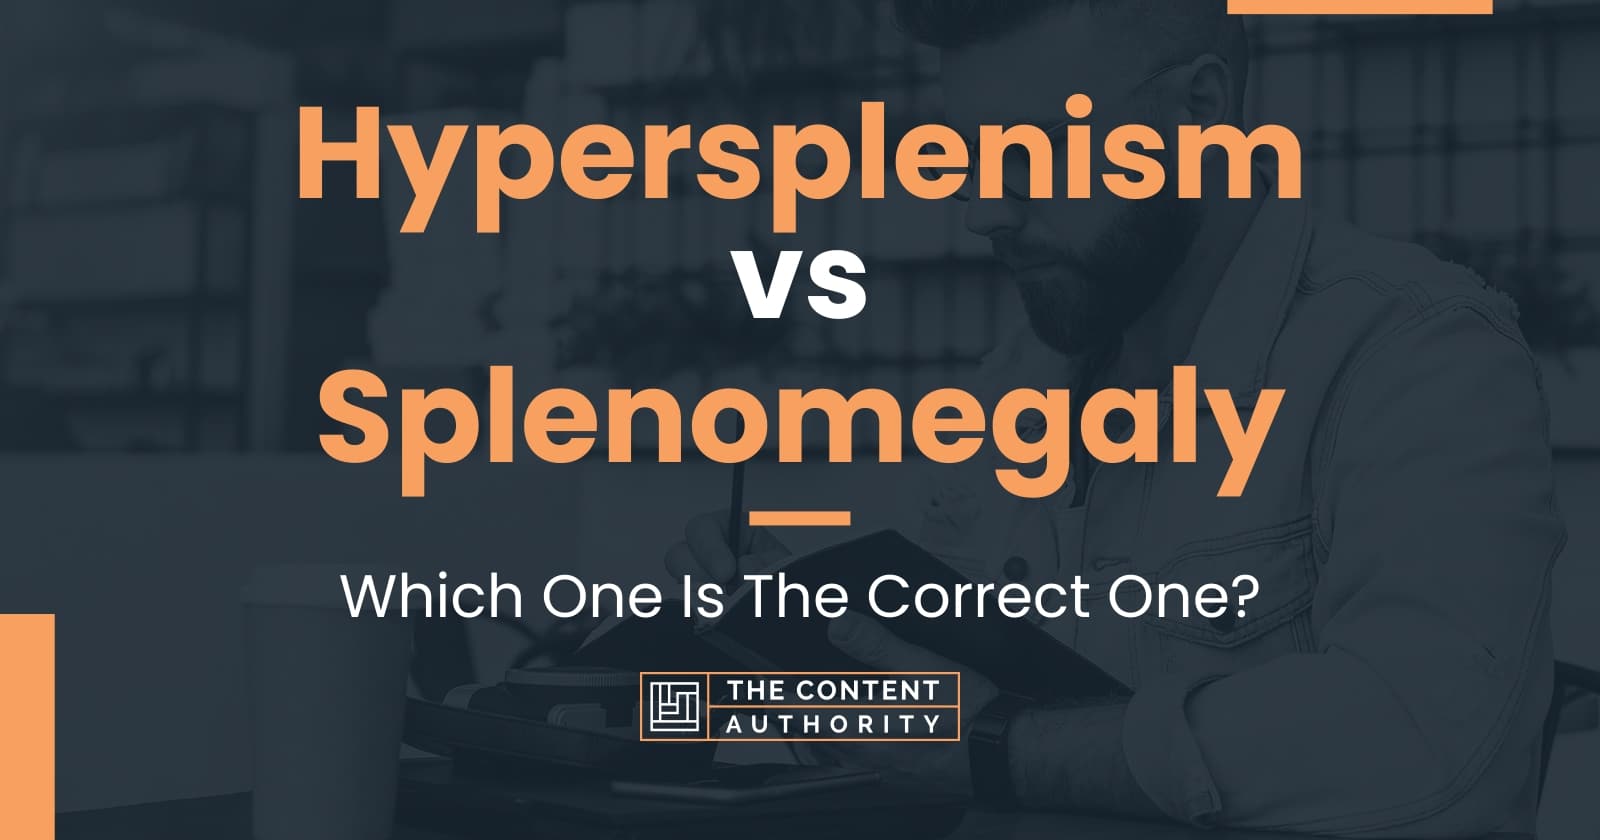 Hypersplenism vs Splenomegaly: Which One Is The Correct One?